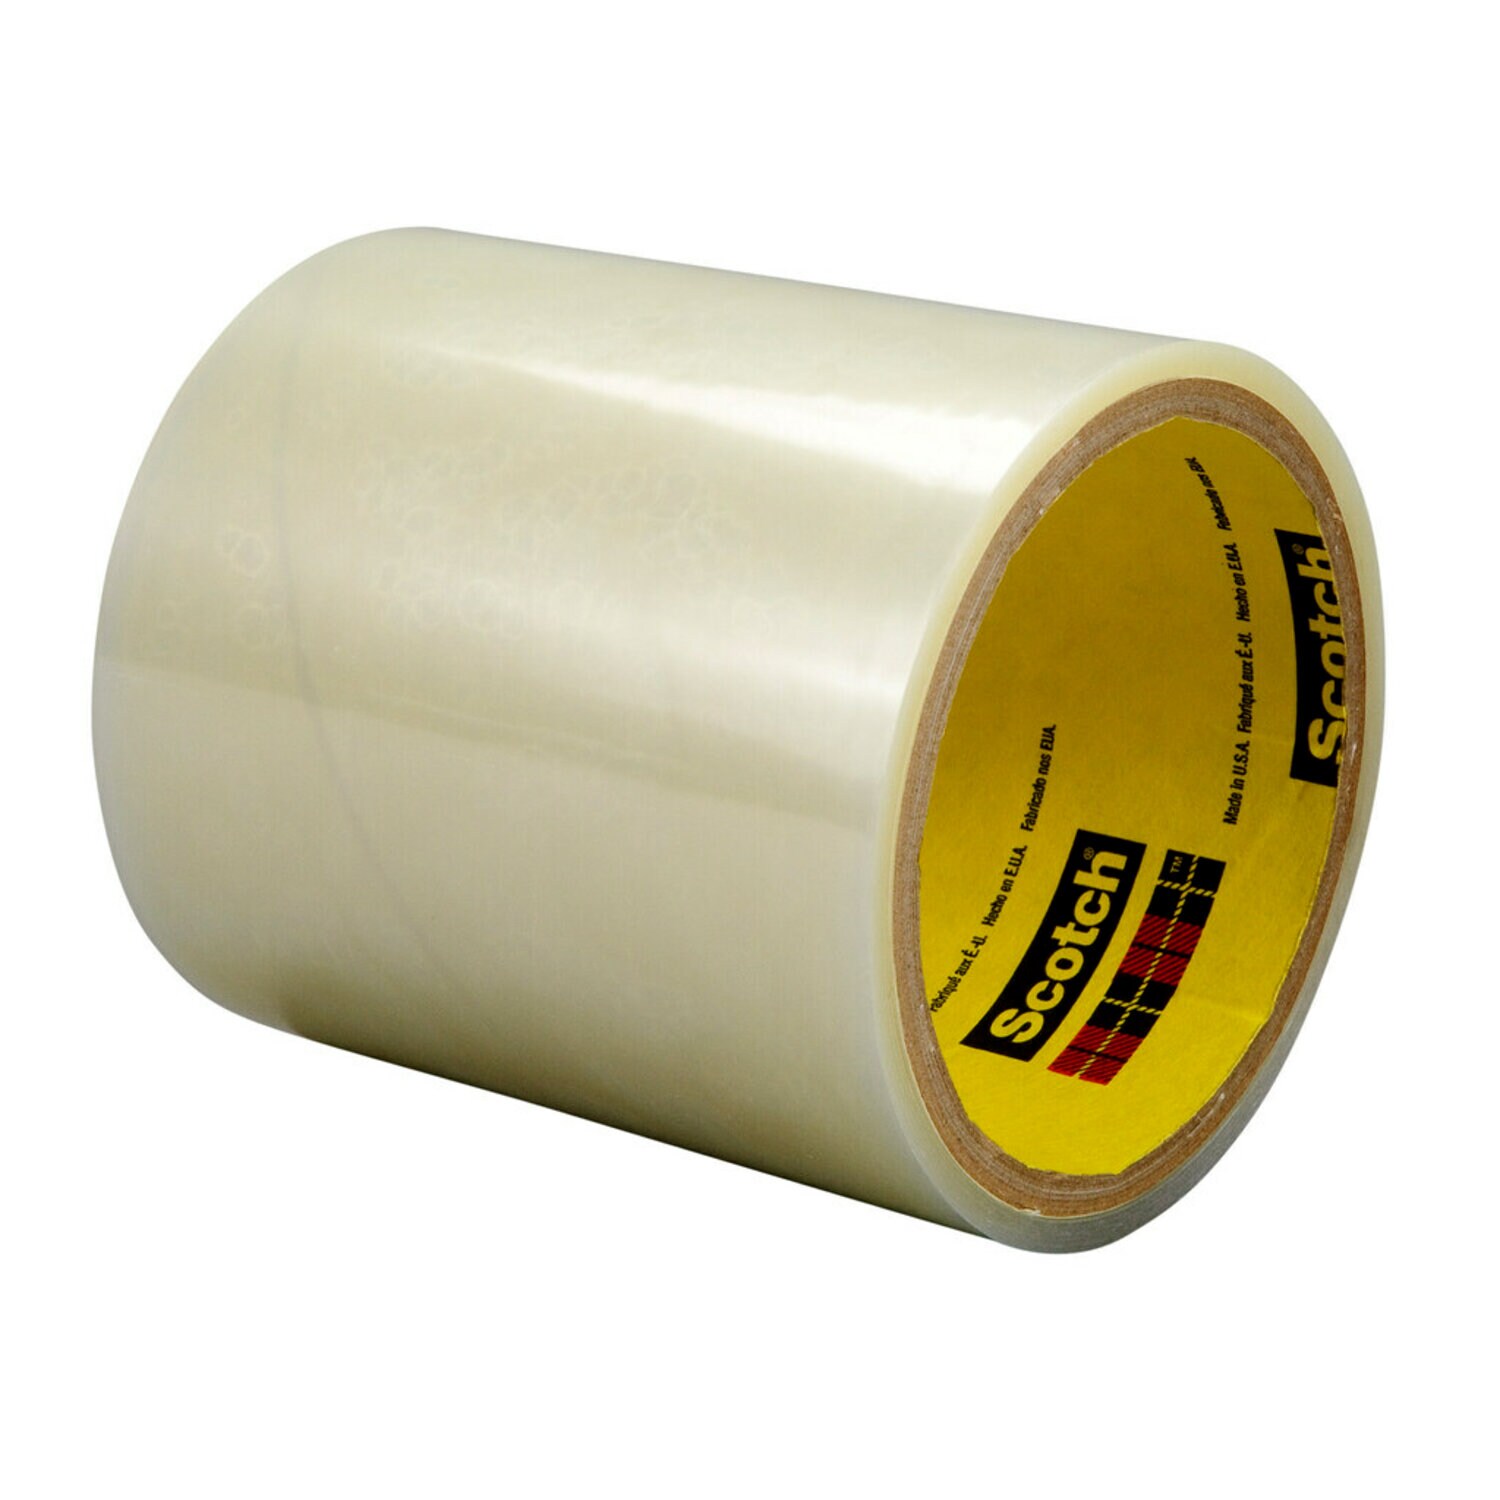 7010374530 - 3M Double Coated Tape 9628FL, Clear, 1 in x 60 yd, 2 Mil, 36/Case